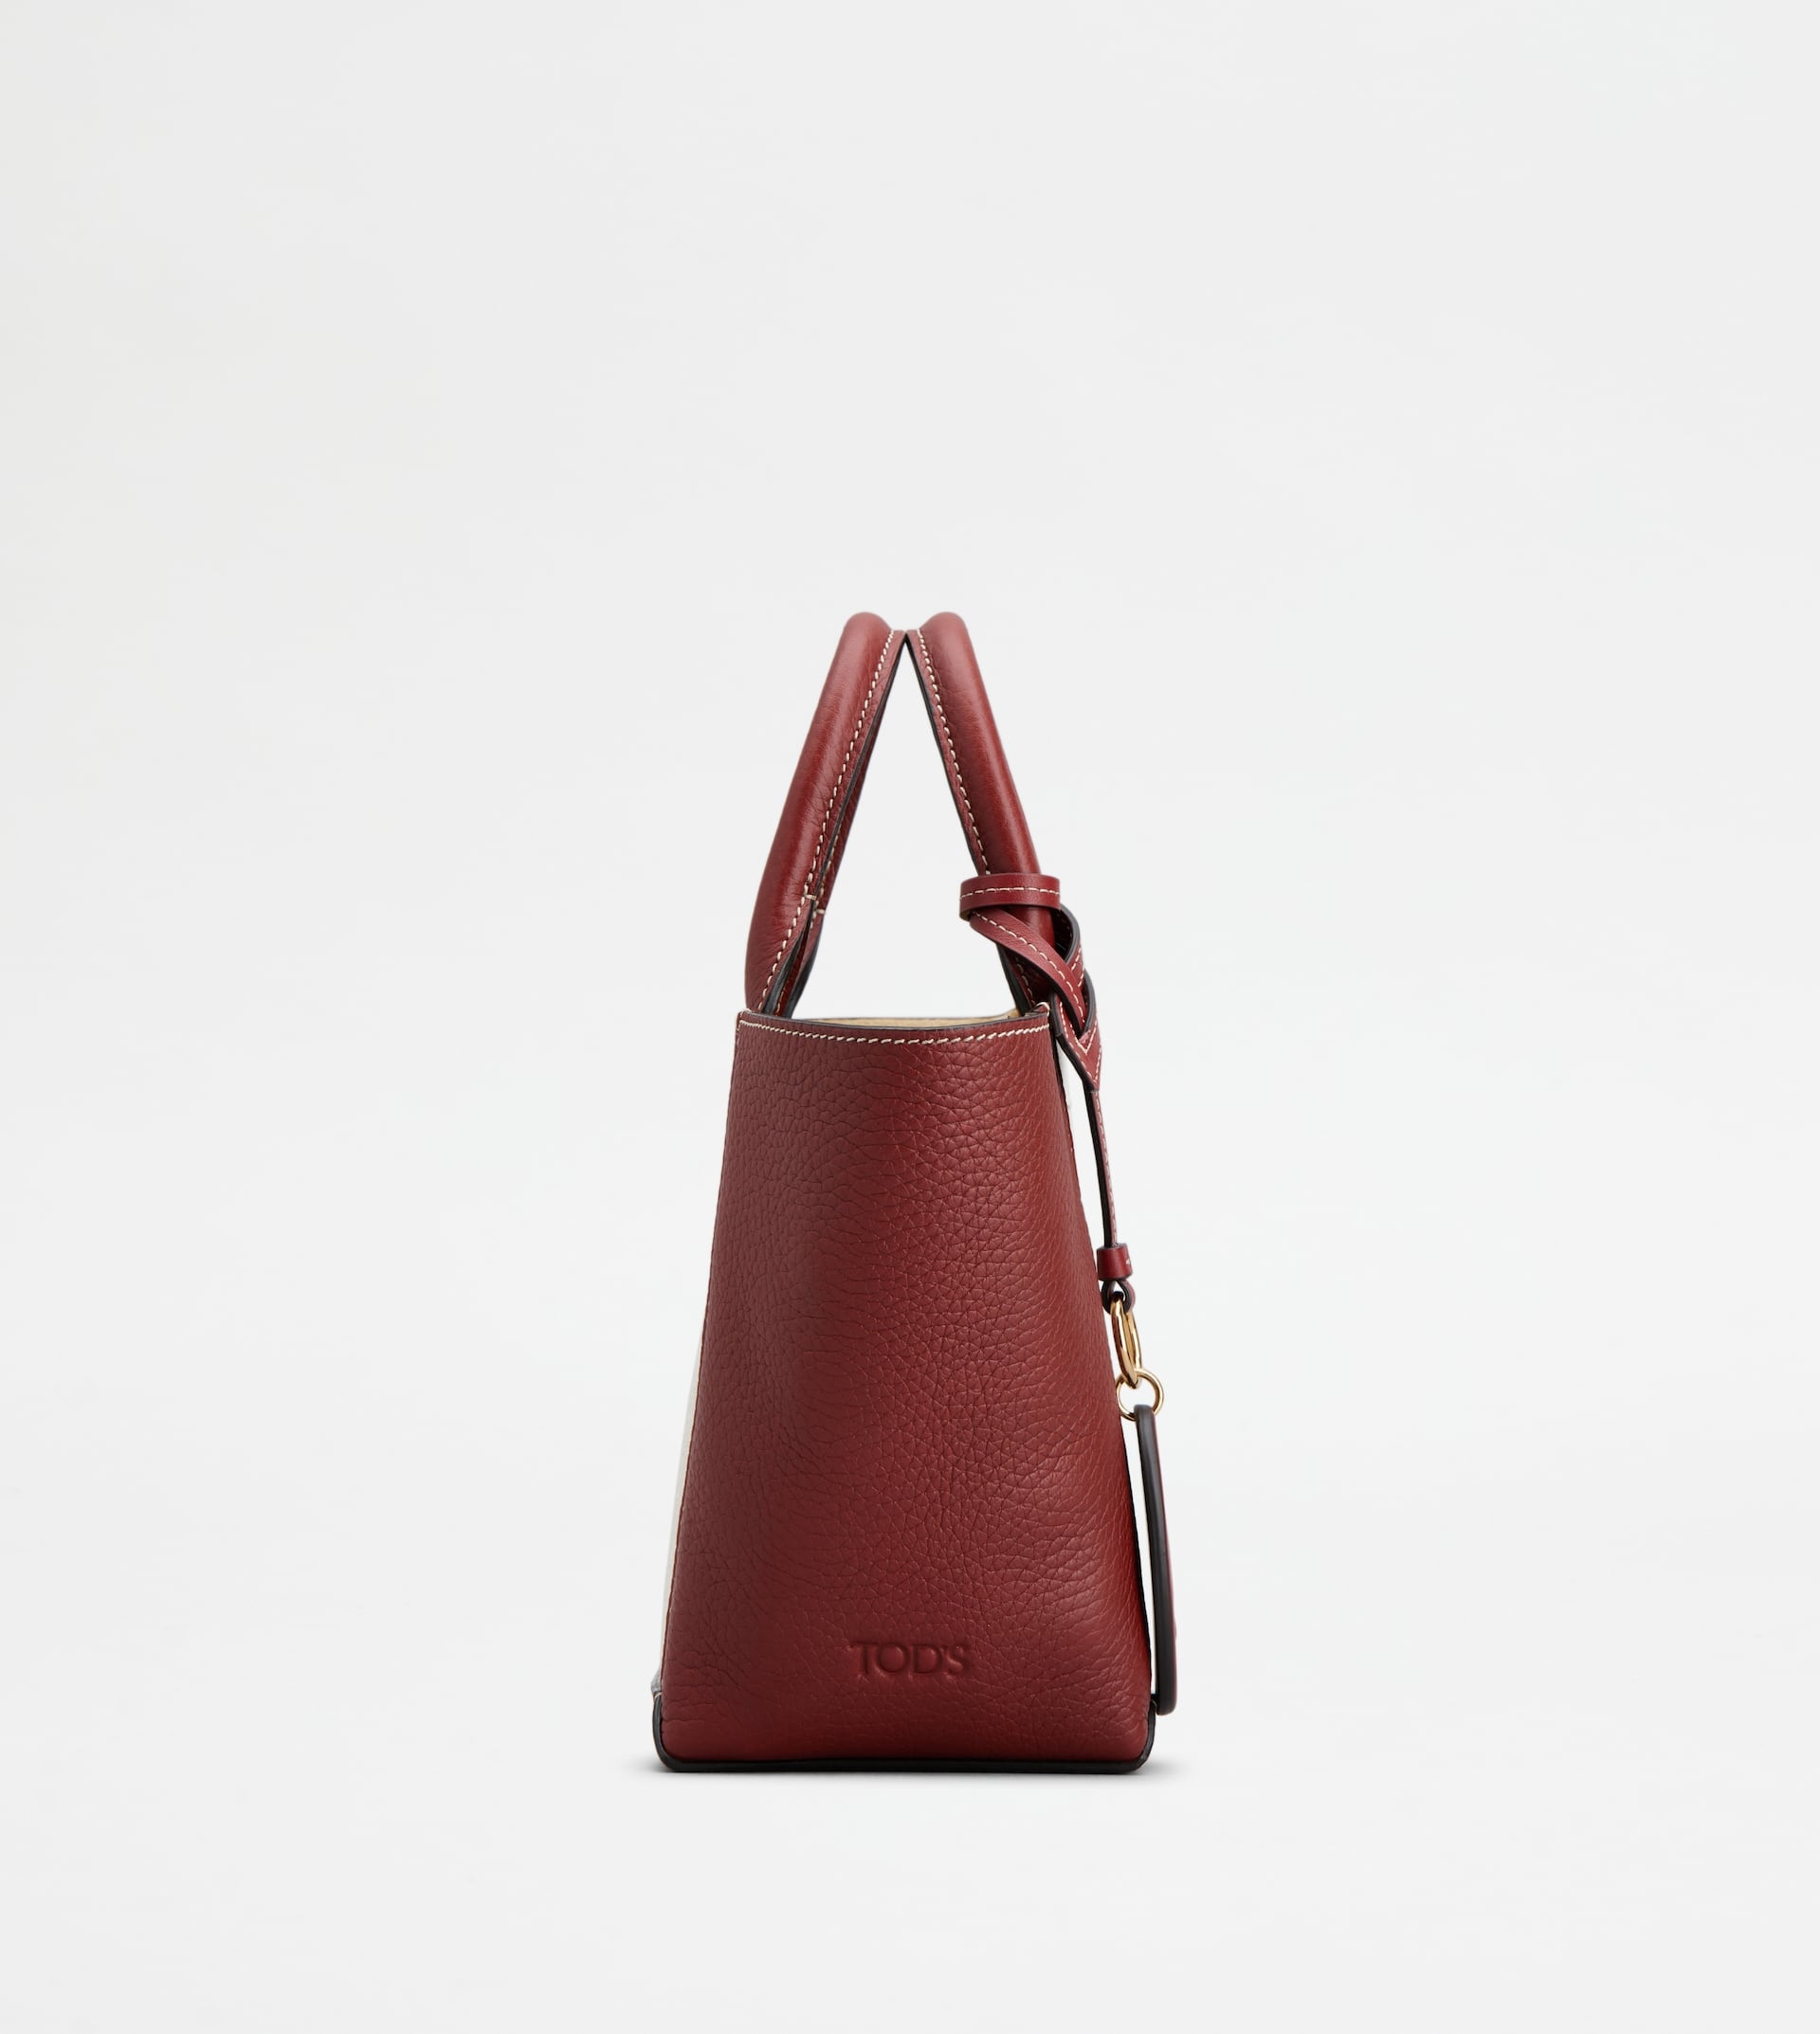 TOD'S DOUBLE UP SHOPPING BAG IN LEATHER AND CANVAS CNY MINI - BEIGE, RED - 2